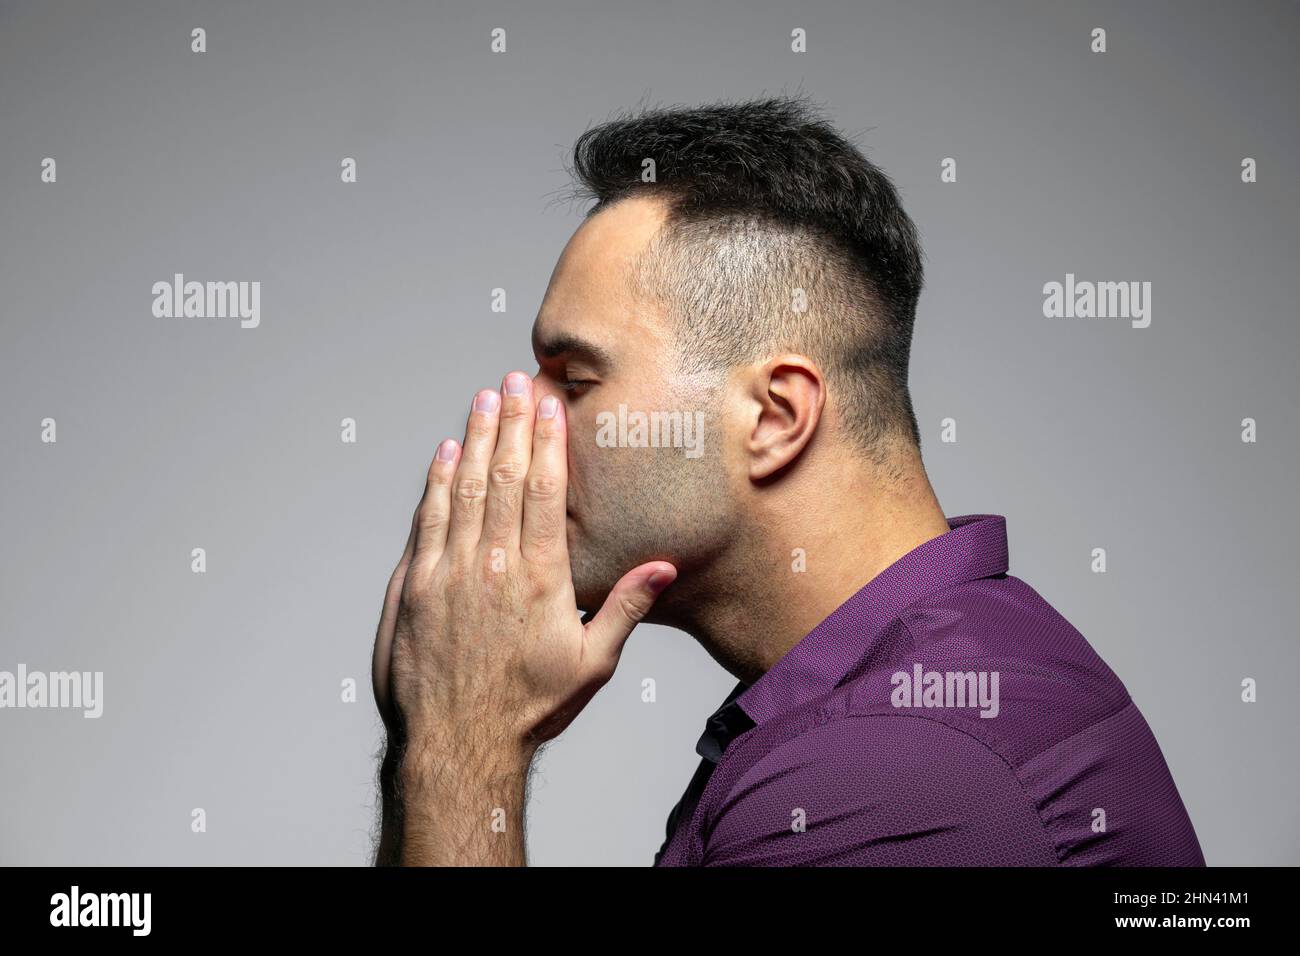 Profile portrait man with eyes closed and head in hands against gray background Stock Photo